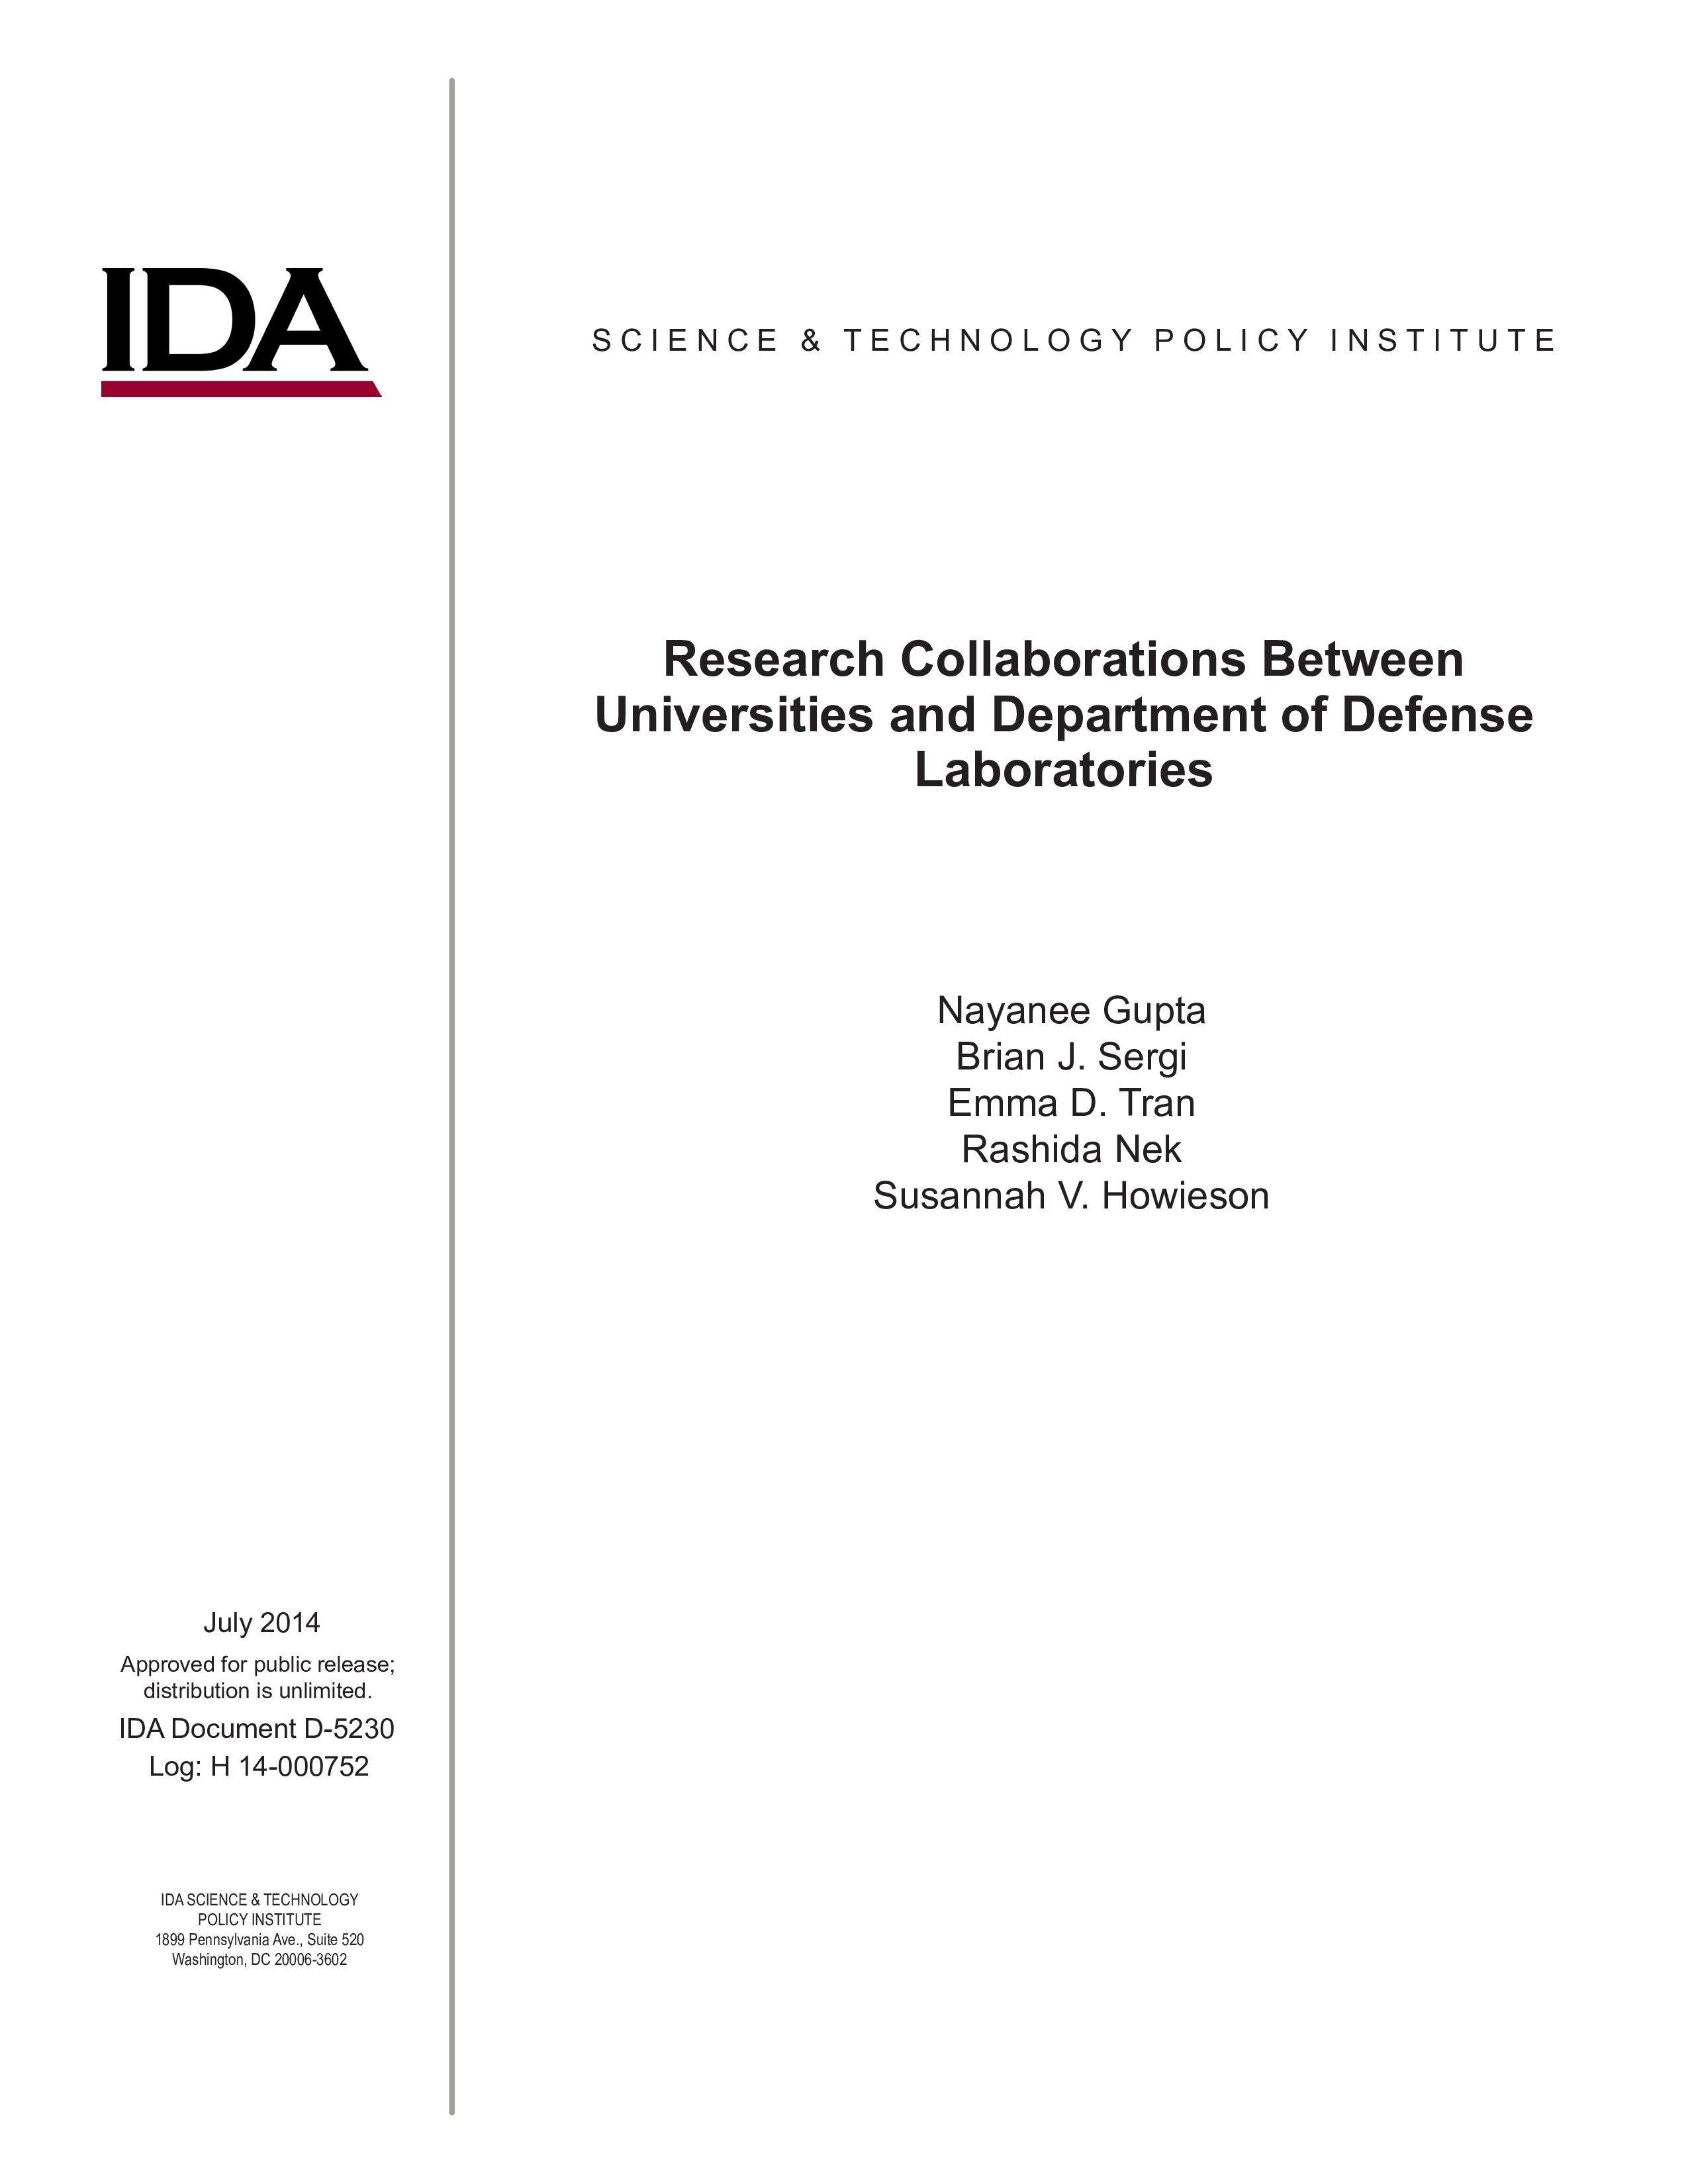 Research Collaborations Between Universities and Department of Defense Laboratories